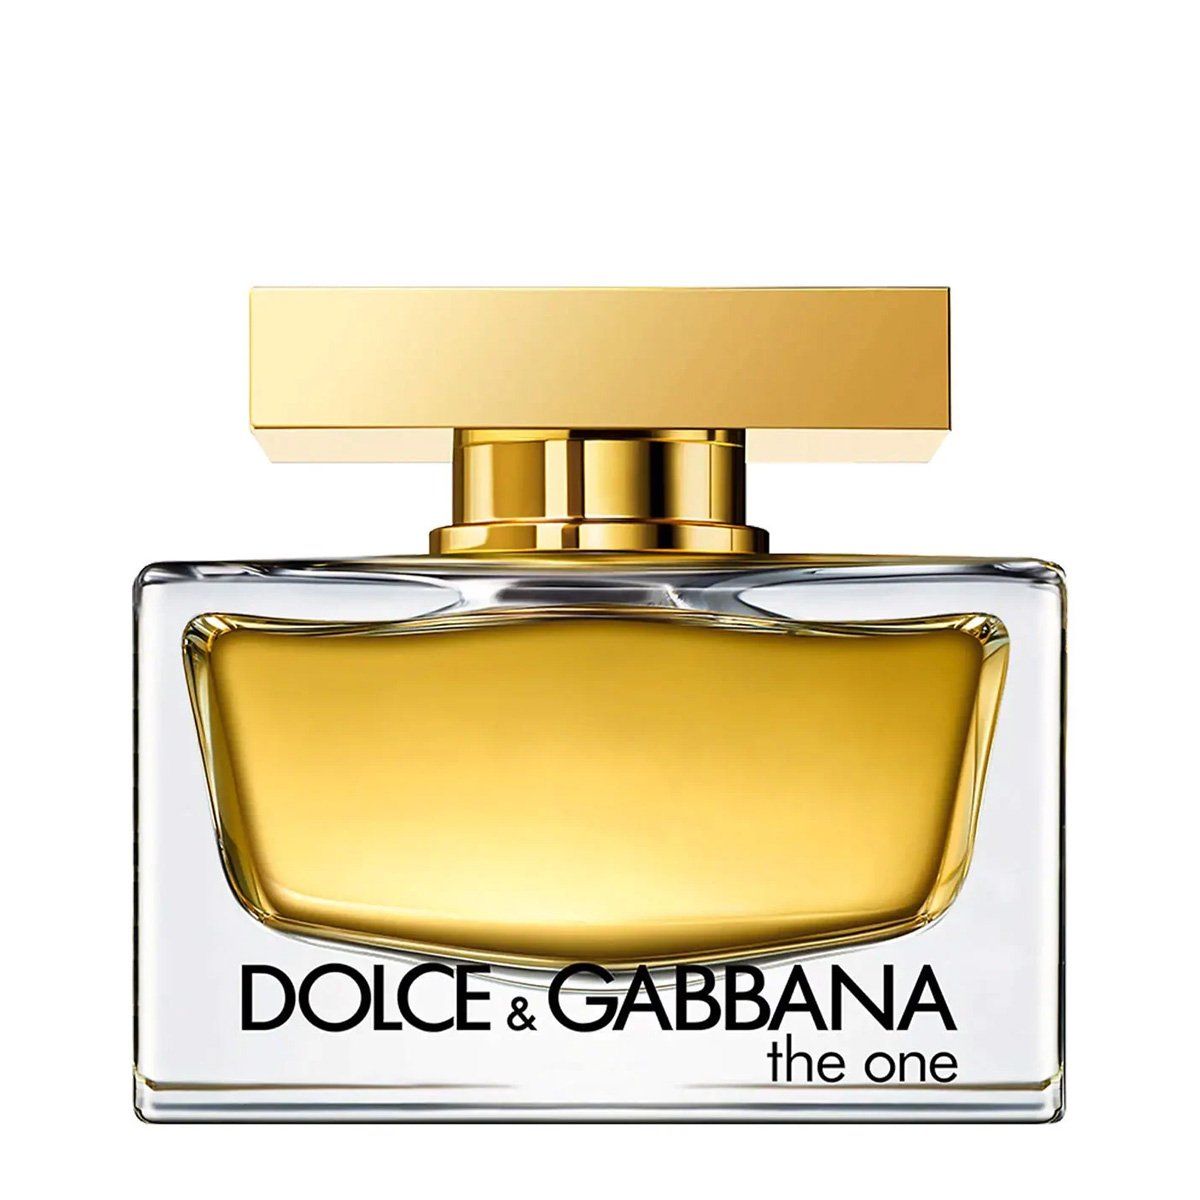 Arriba 40+ imagen dolce and gabbana chat - Abzlocal.mx